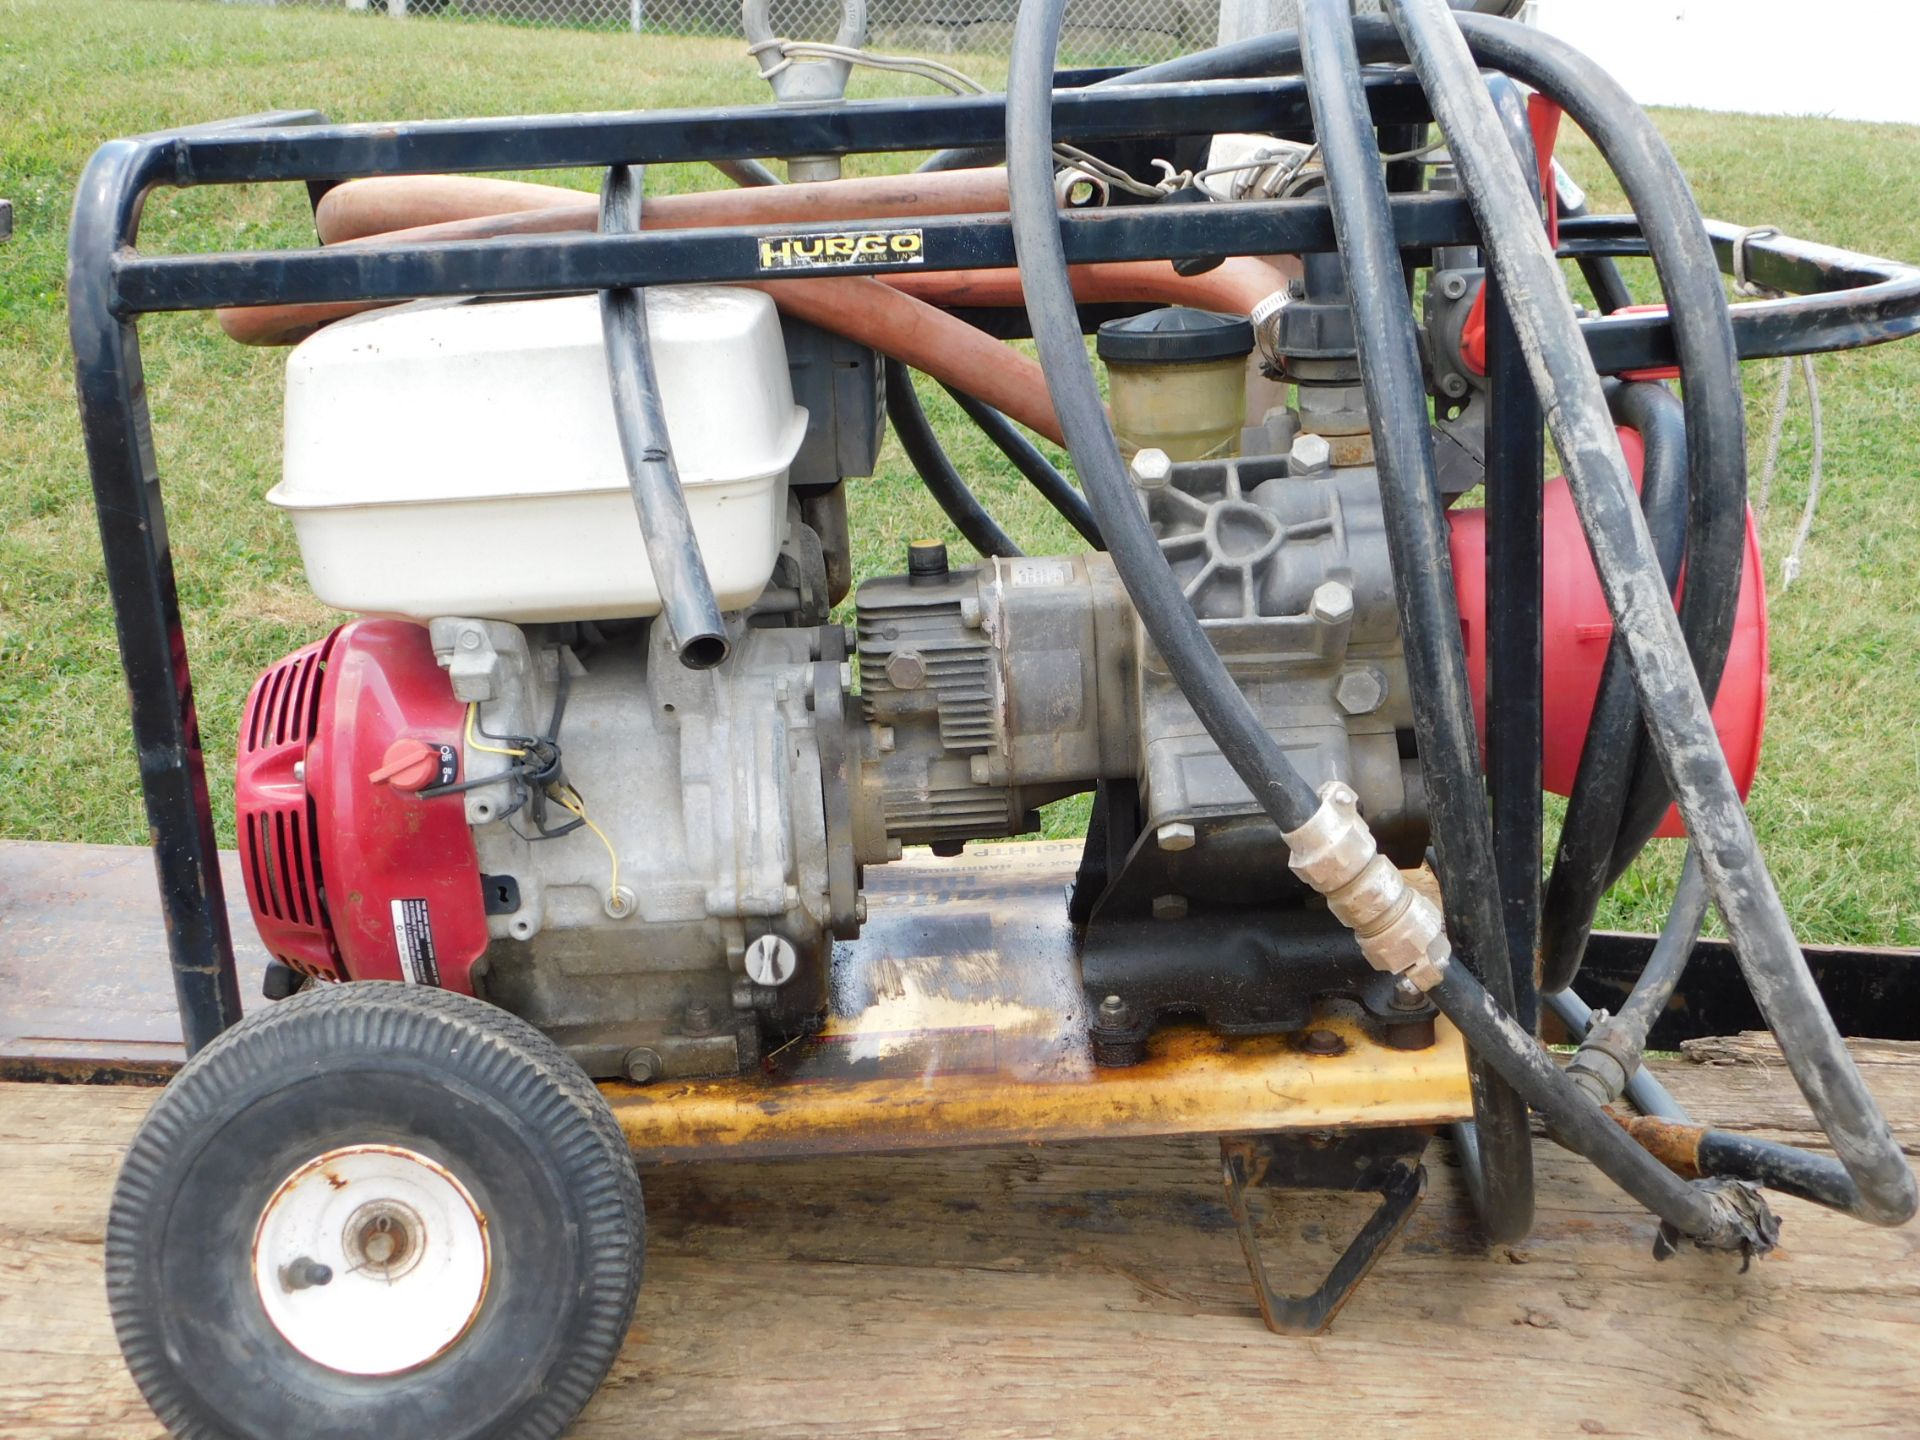 Hurco Model HTP-23-700H Gas-Powered Hydrostatic Test Pump with Honda GX 390 Engine - Image 6 of 7